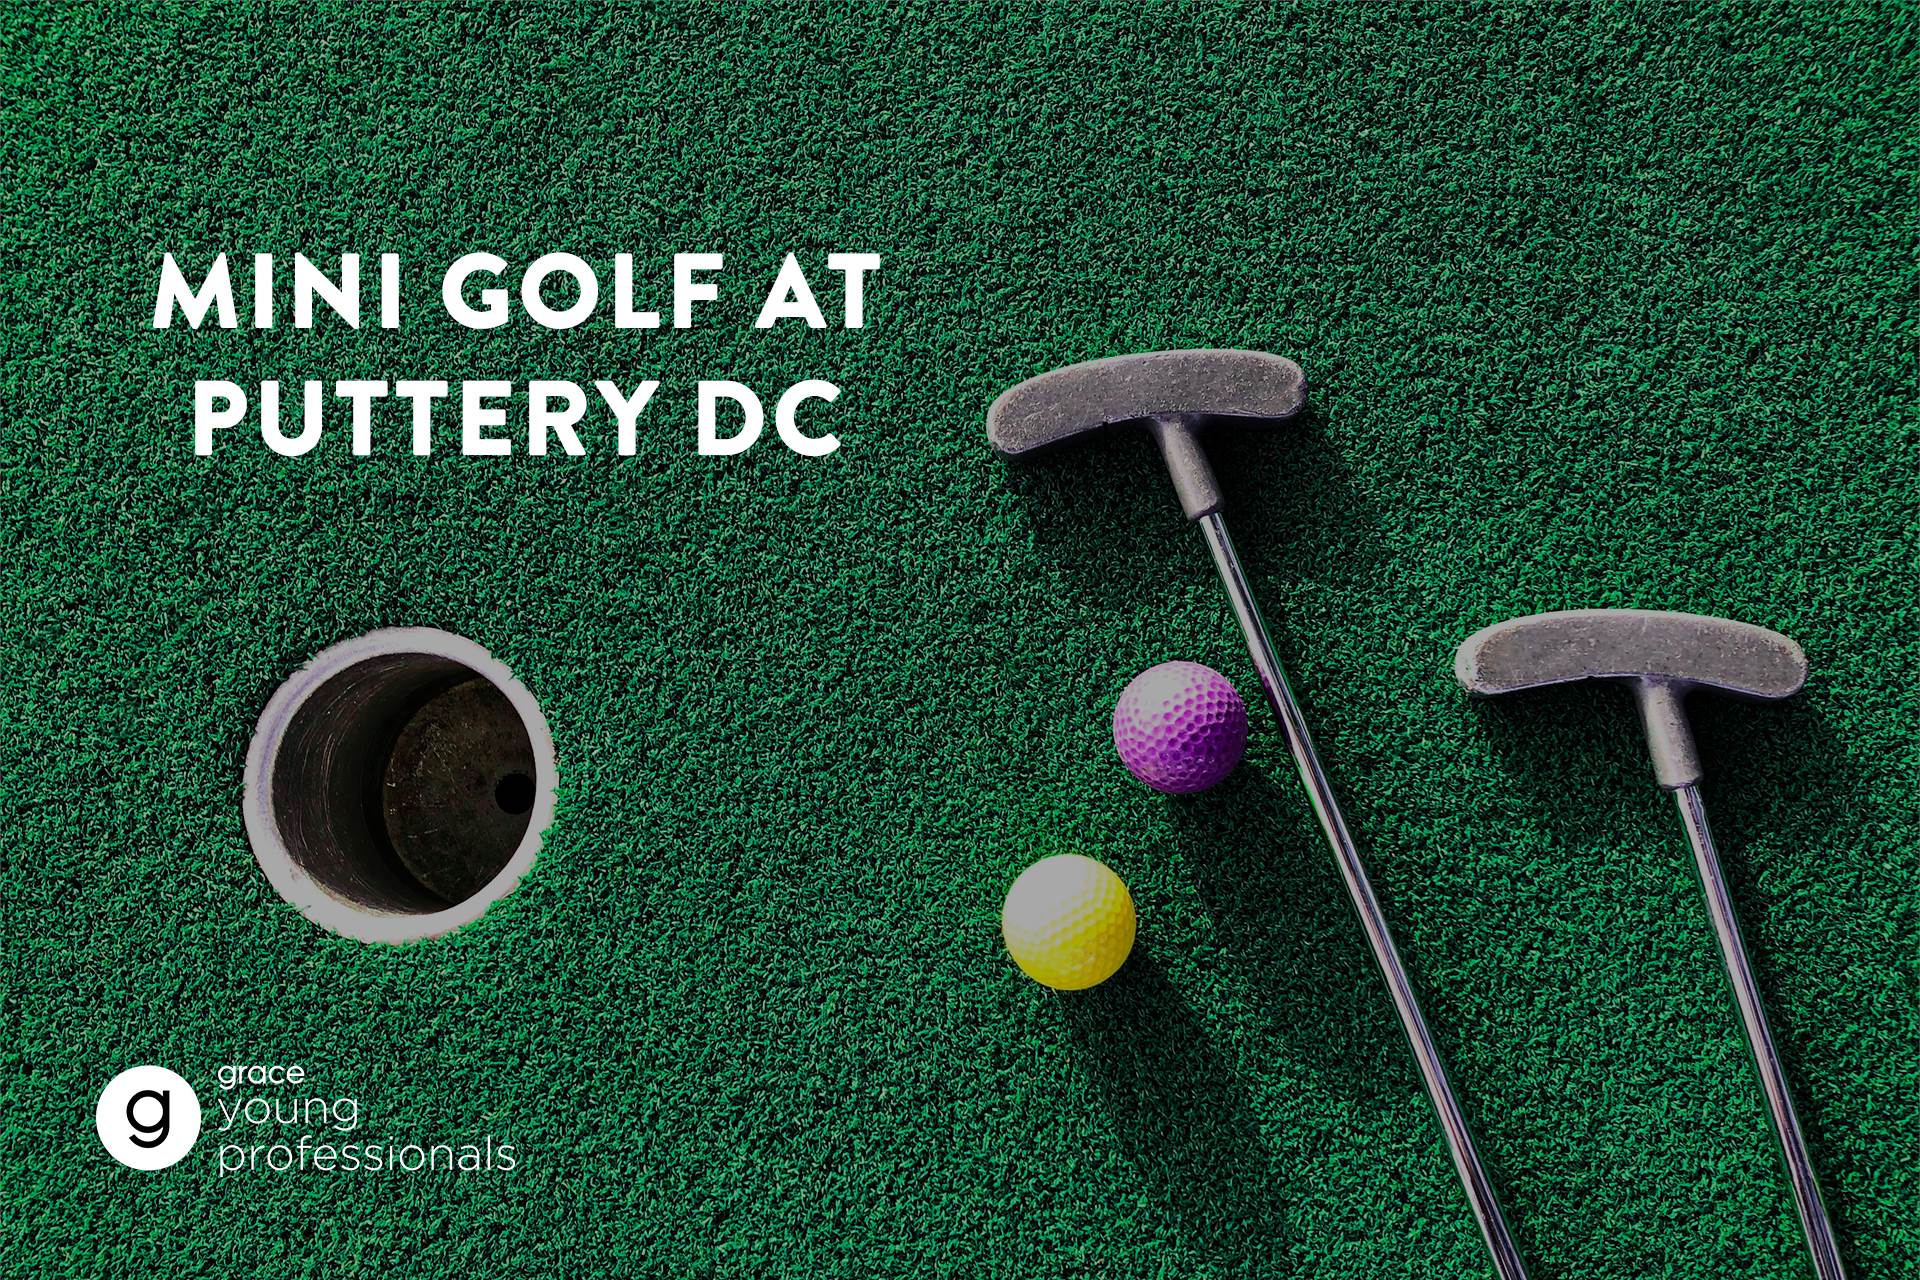 Link to Mini Golf at Puttery DC detail page